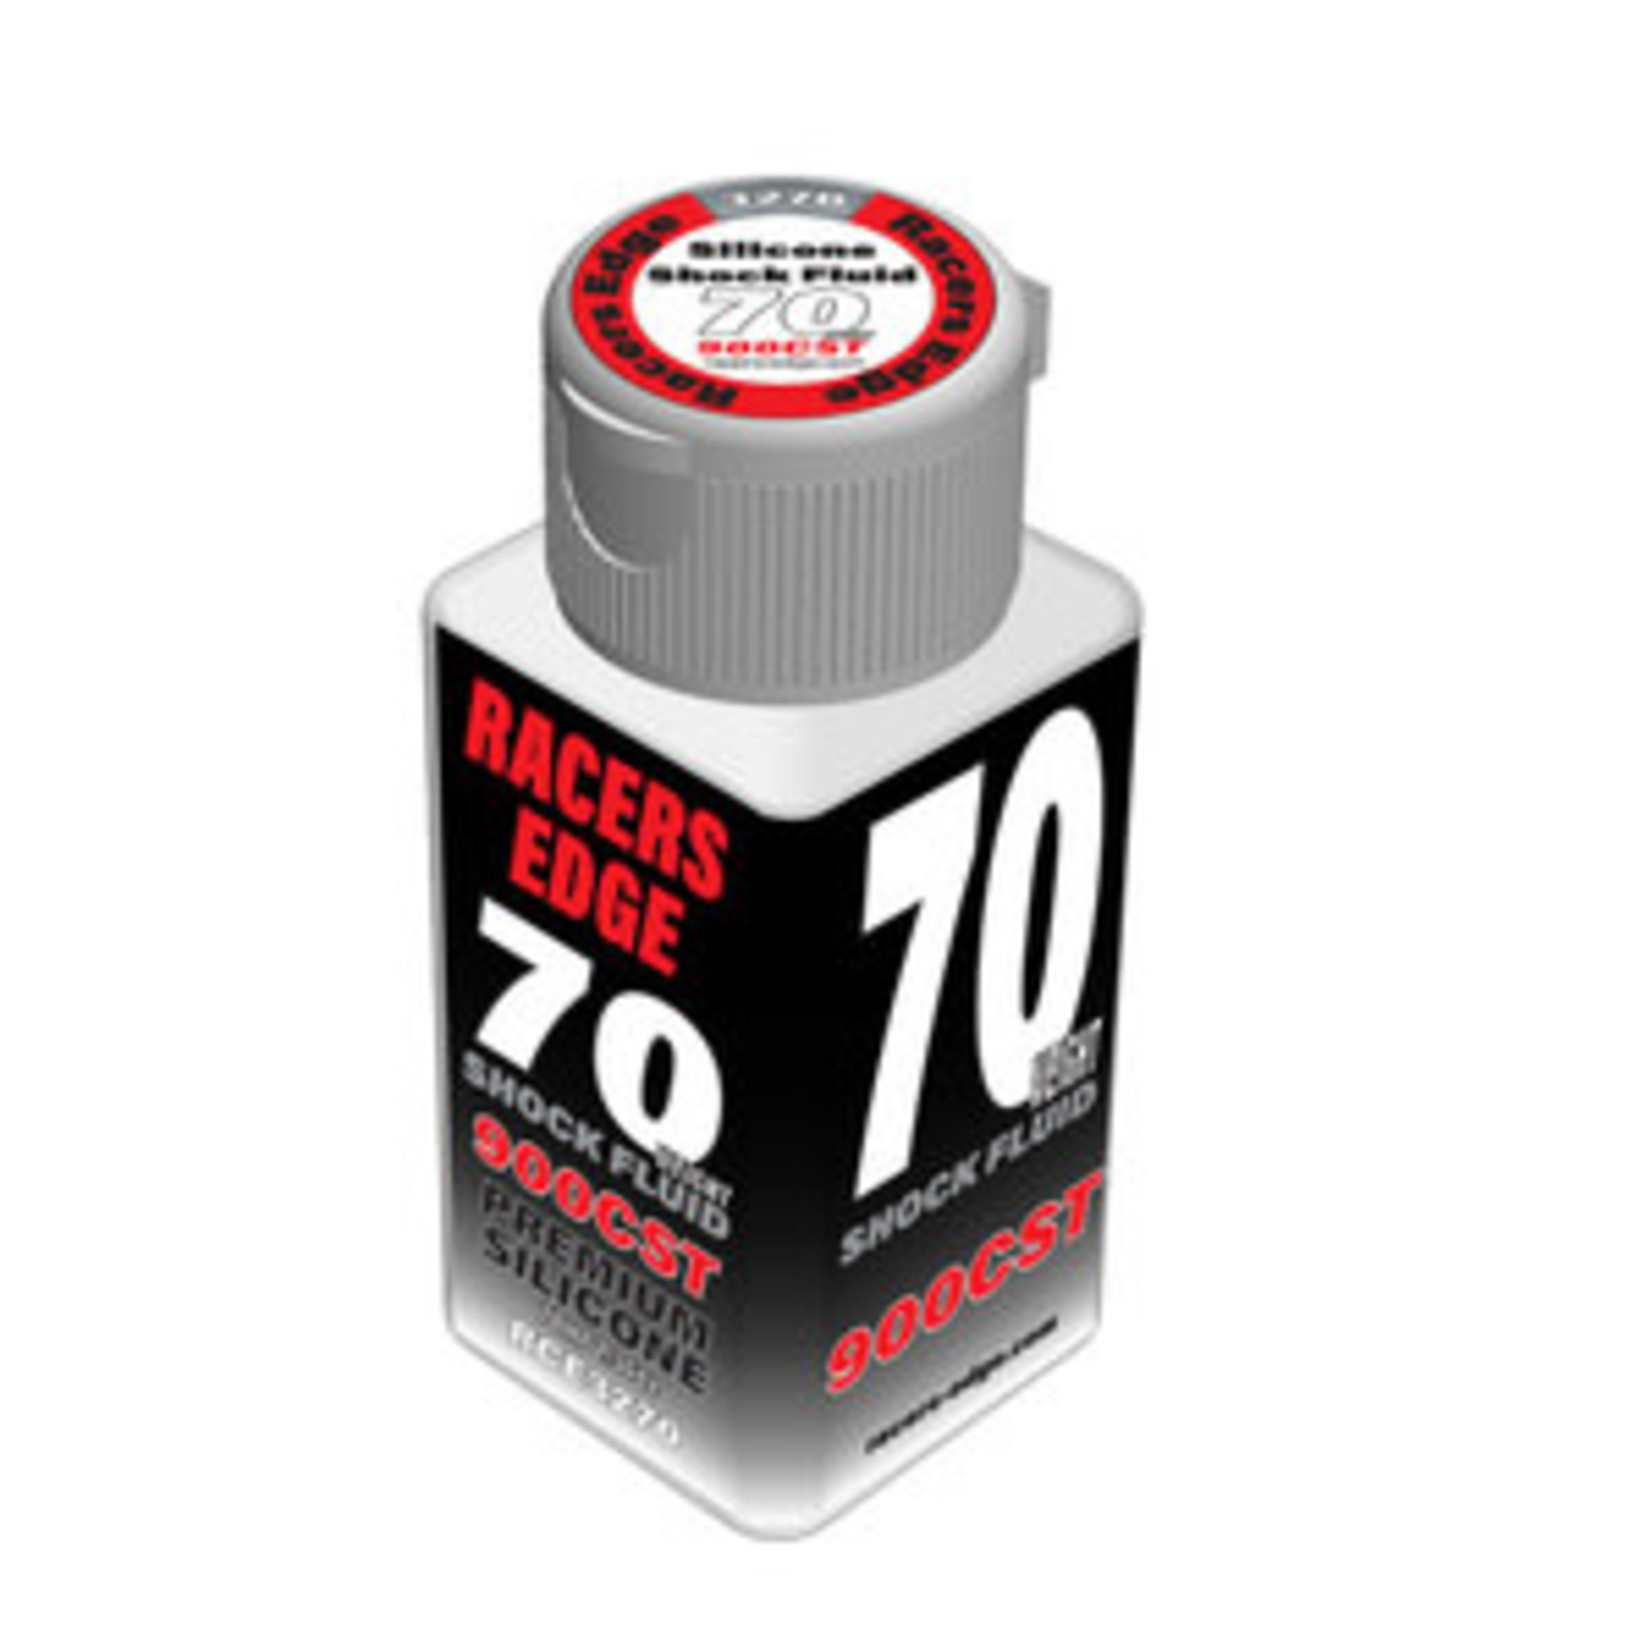 Racers Edge 70 Weight 900cst 70ml 2.36oz Pure Silicone Shock Oil